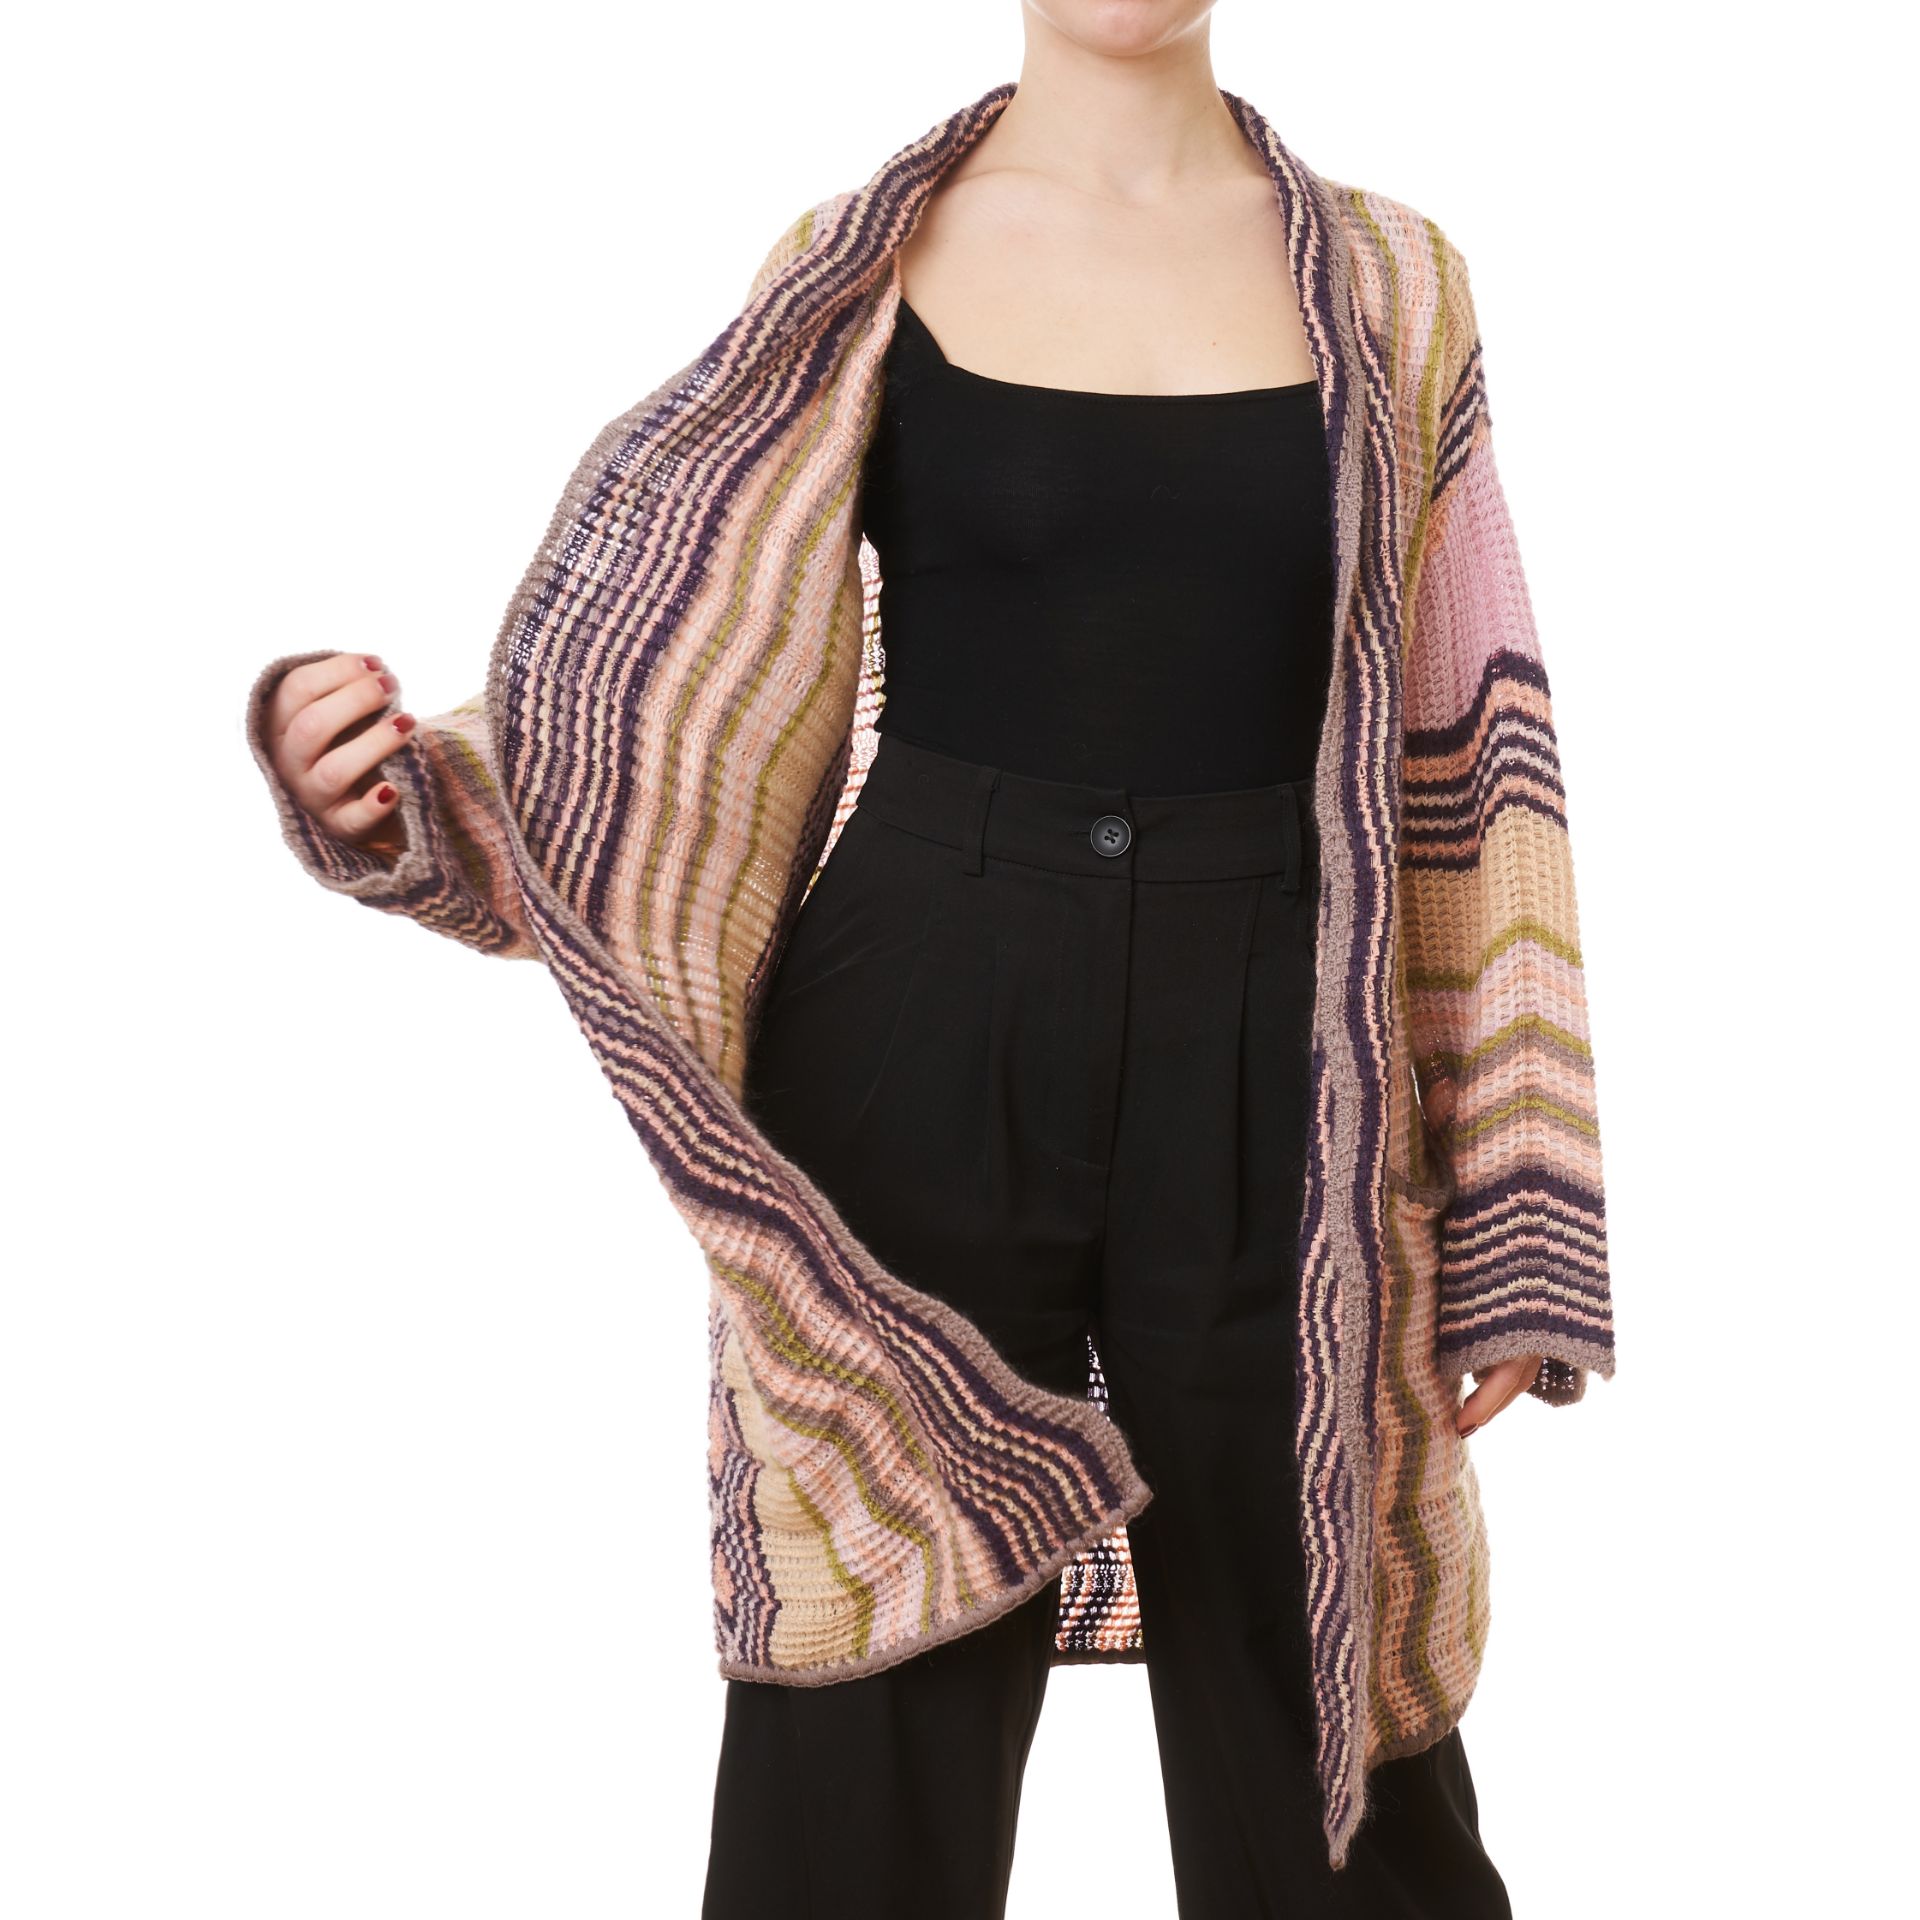 NO RESERVE TWO MISSONI LONG CARDIGANS - Image 3 of 8